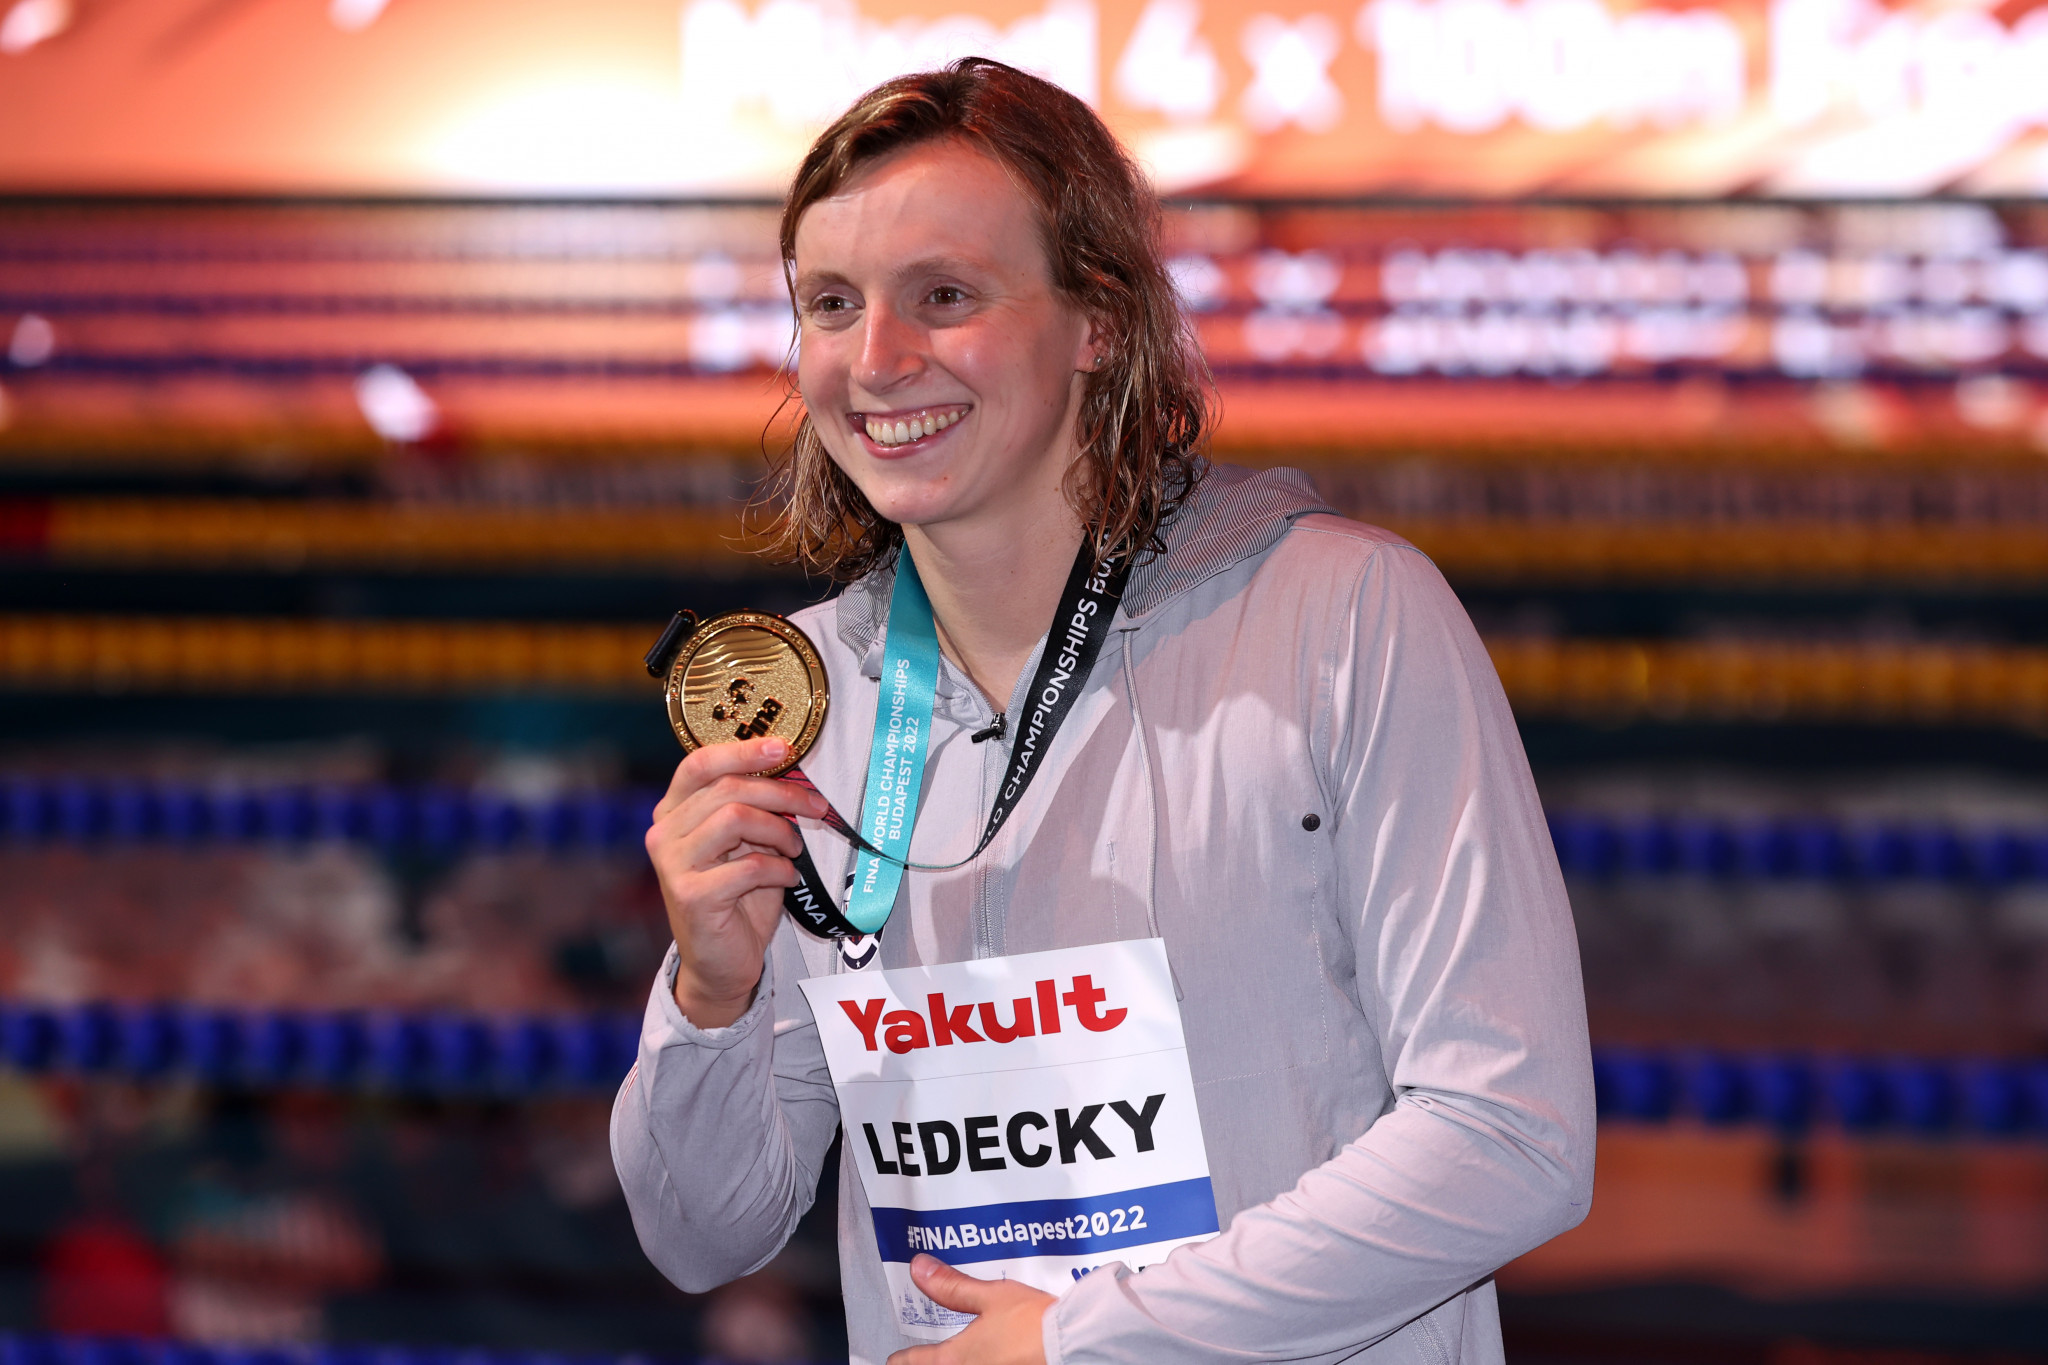 Katie Ledecky of the United States won her 19th gold medal at the FINA World Championships with a fifth consecutive victory in the women's 800m freestyle ©Getty Images